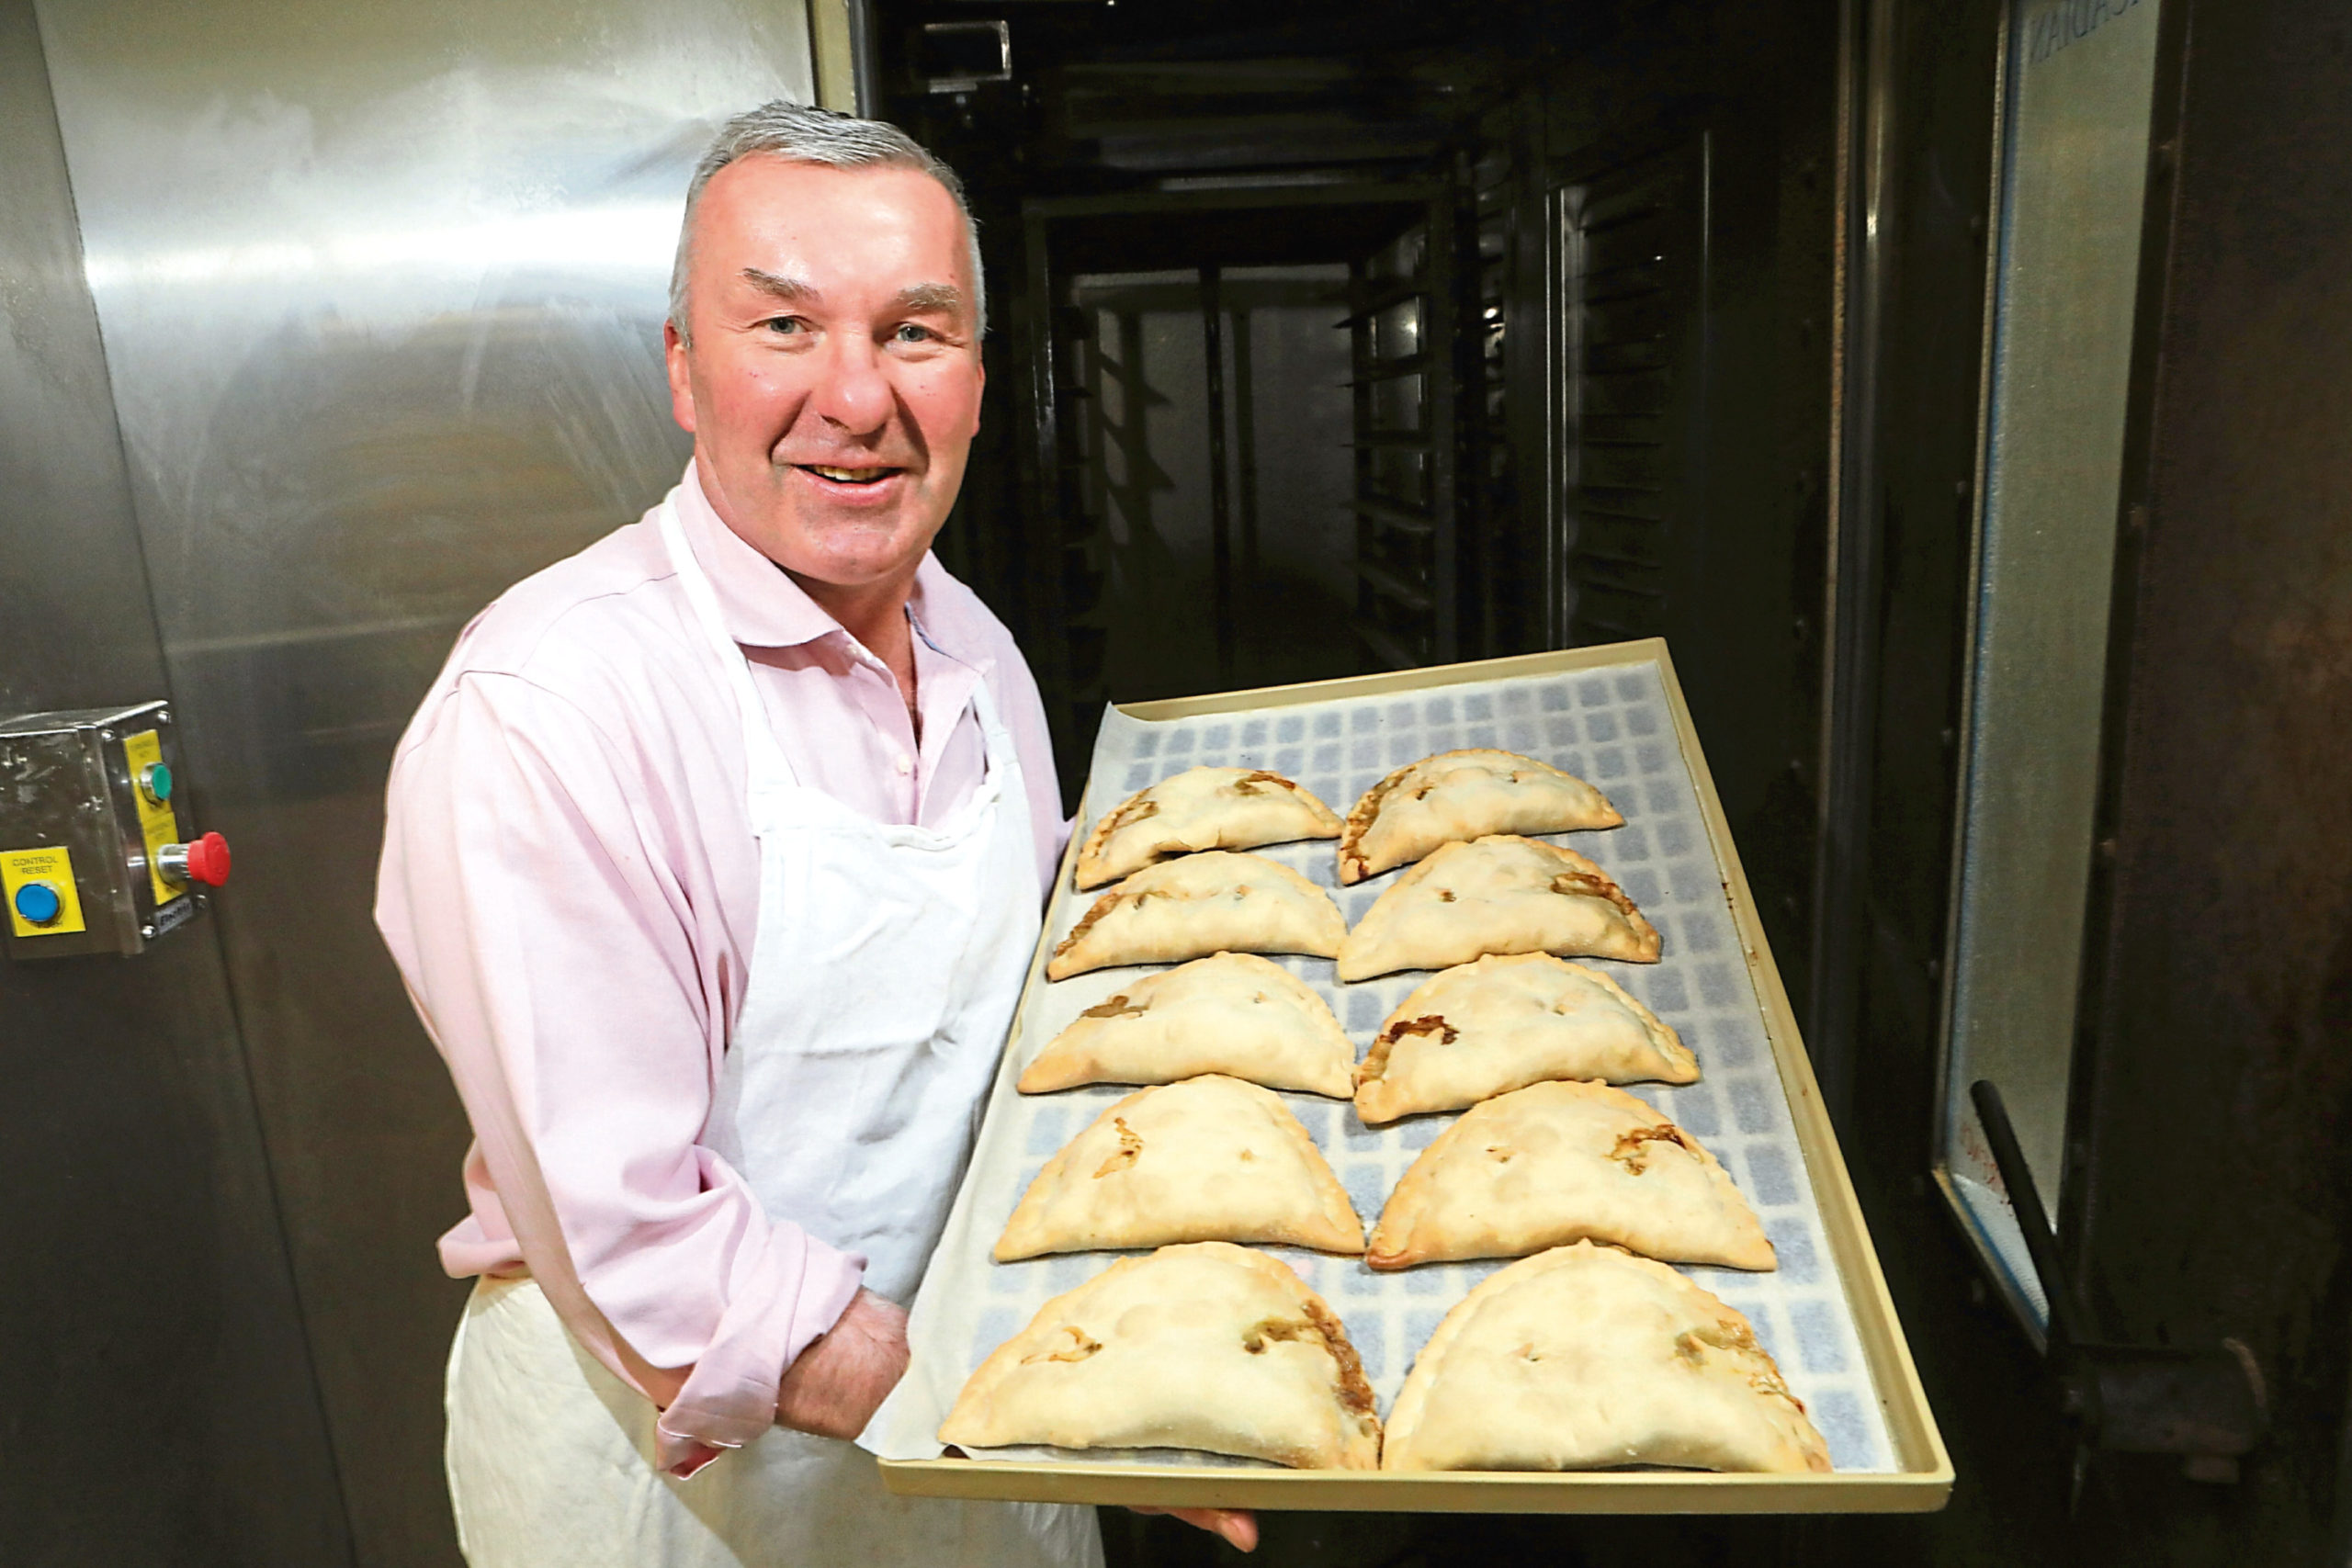 MIchael Saddler with a tray of bridies just out of the oven.